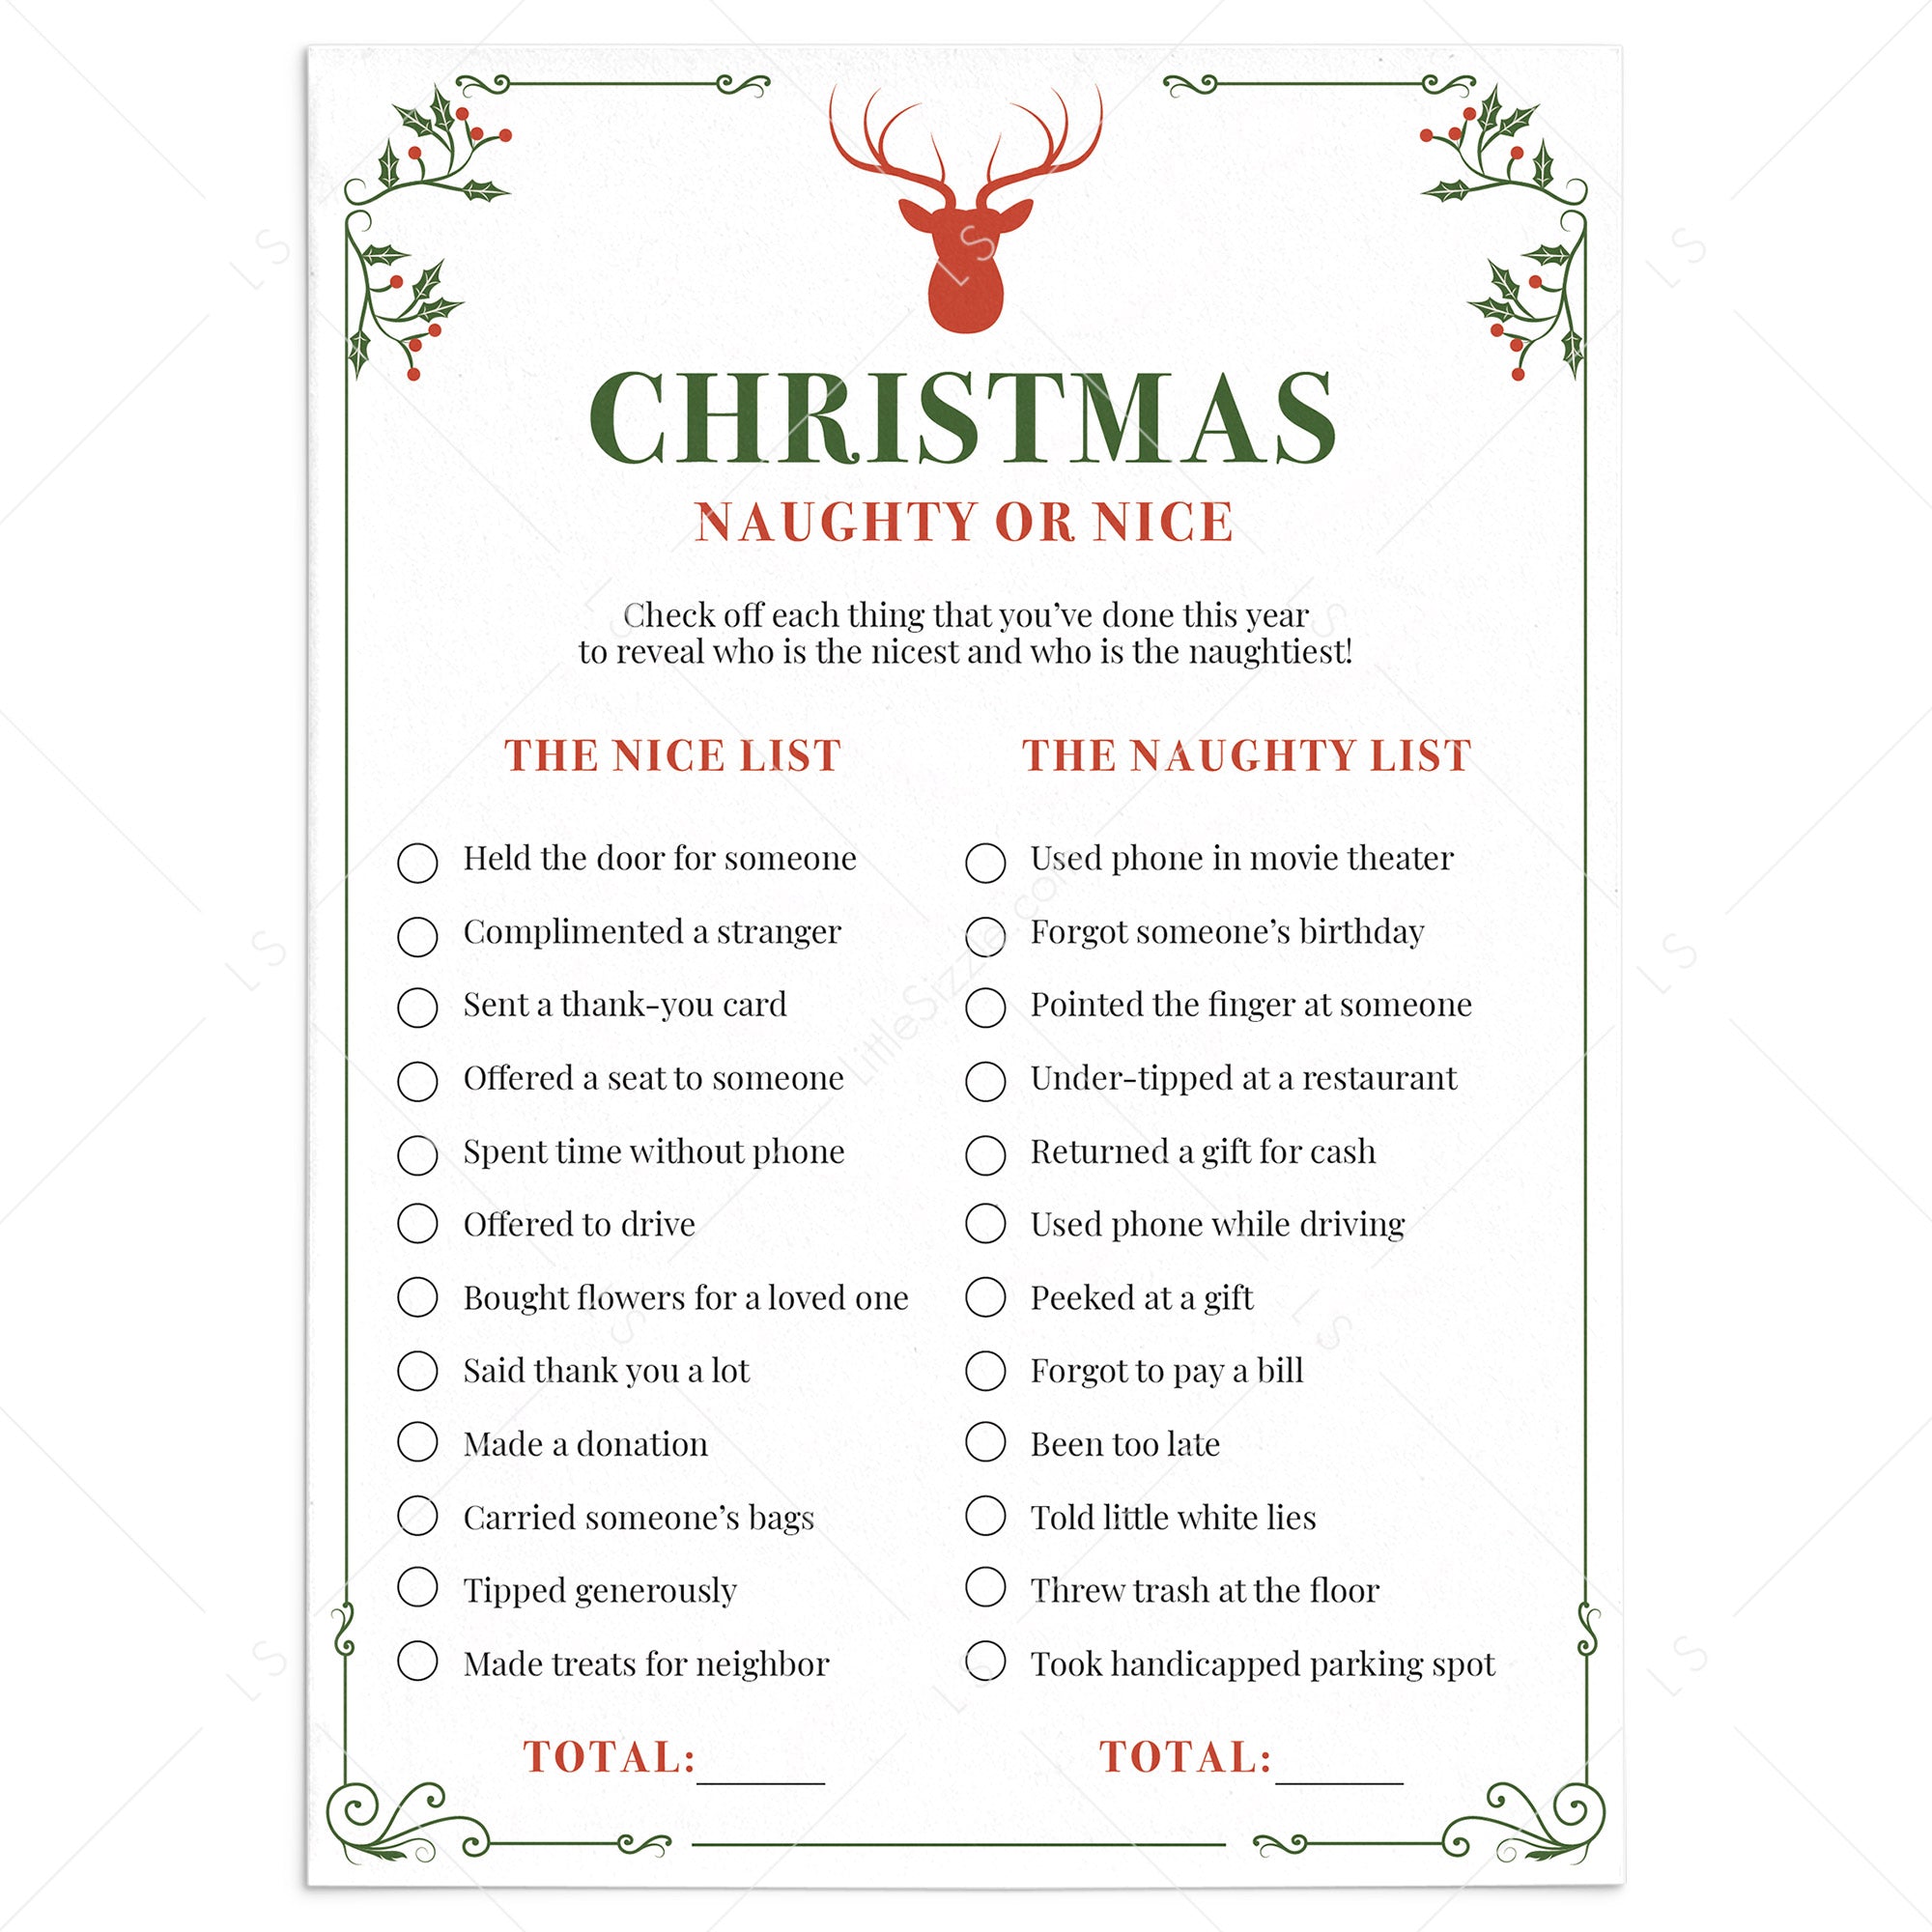 Christmas Naughty or Nice Game Printable by LittleSizzle